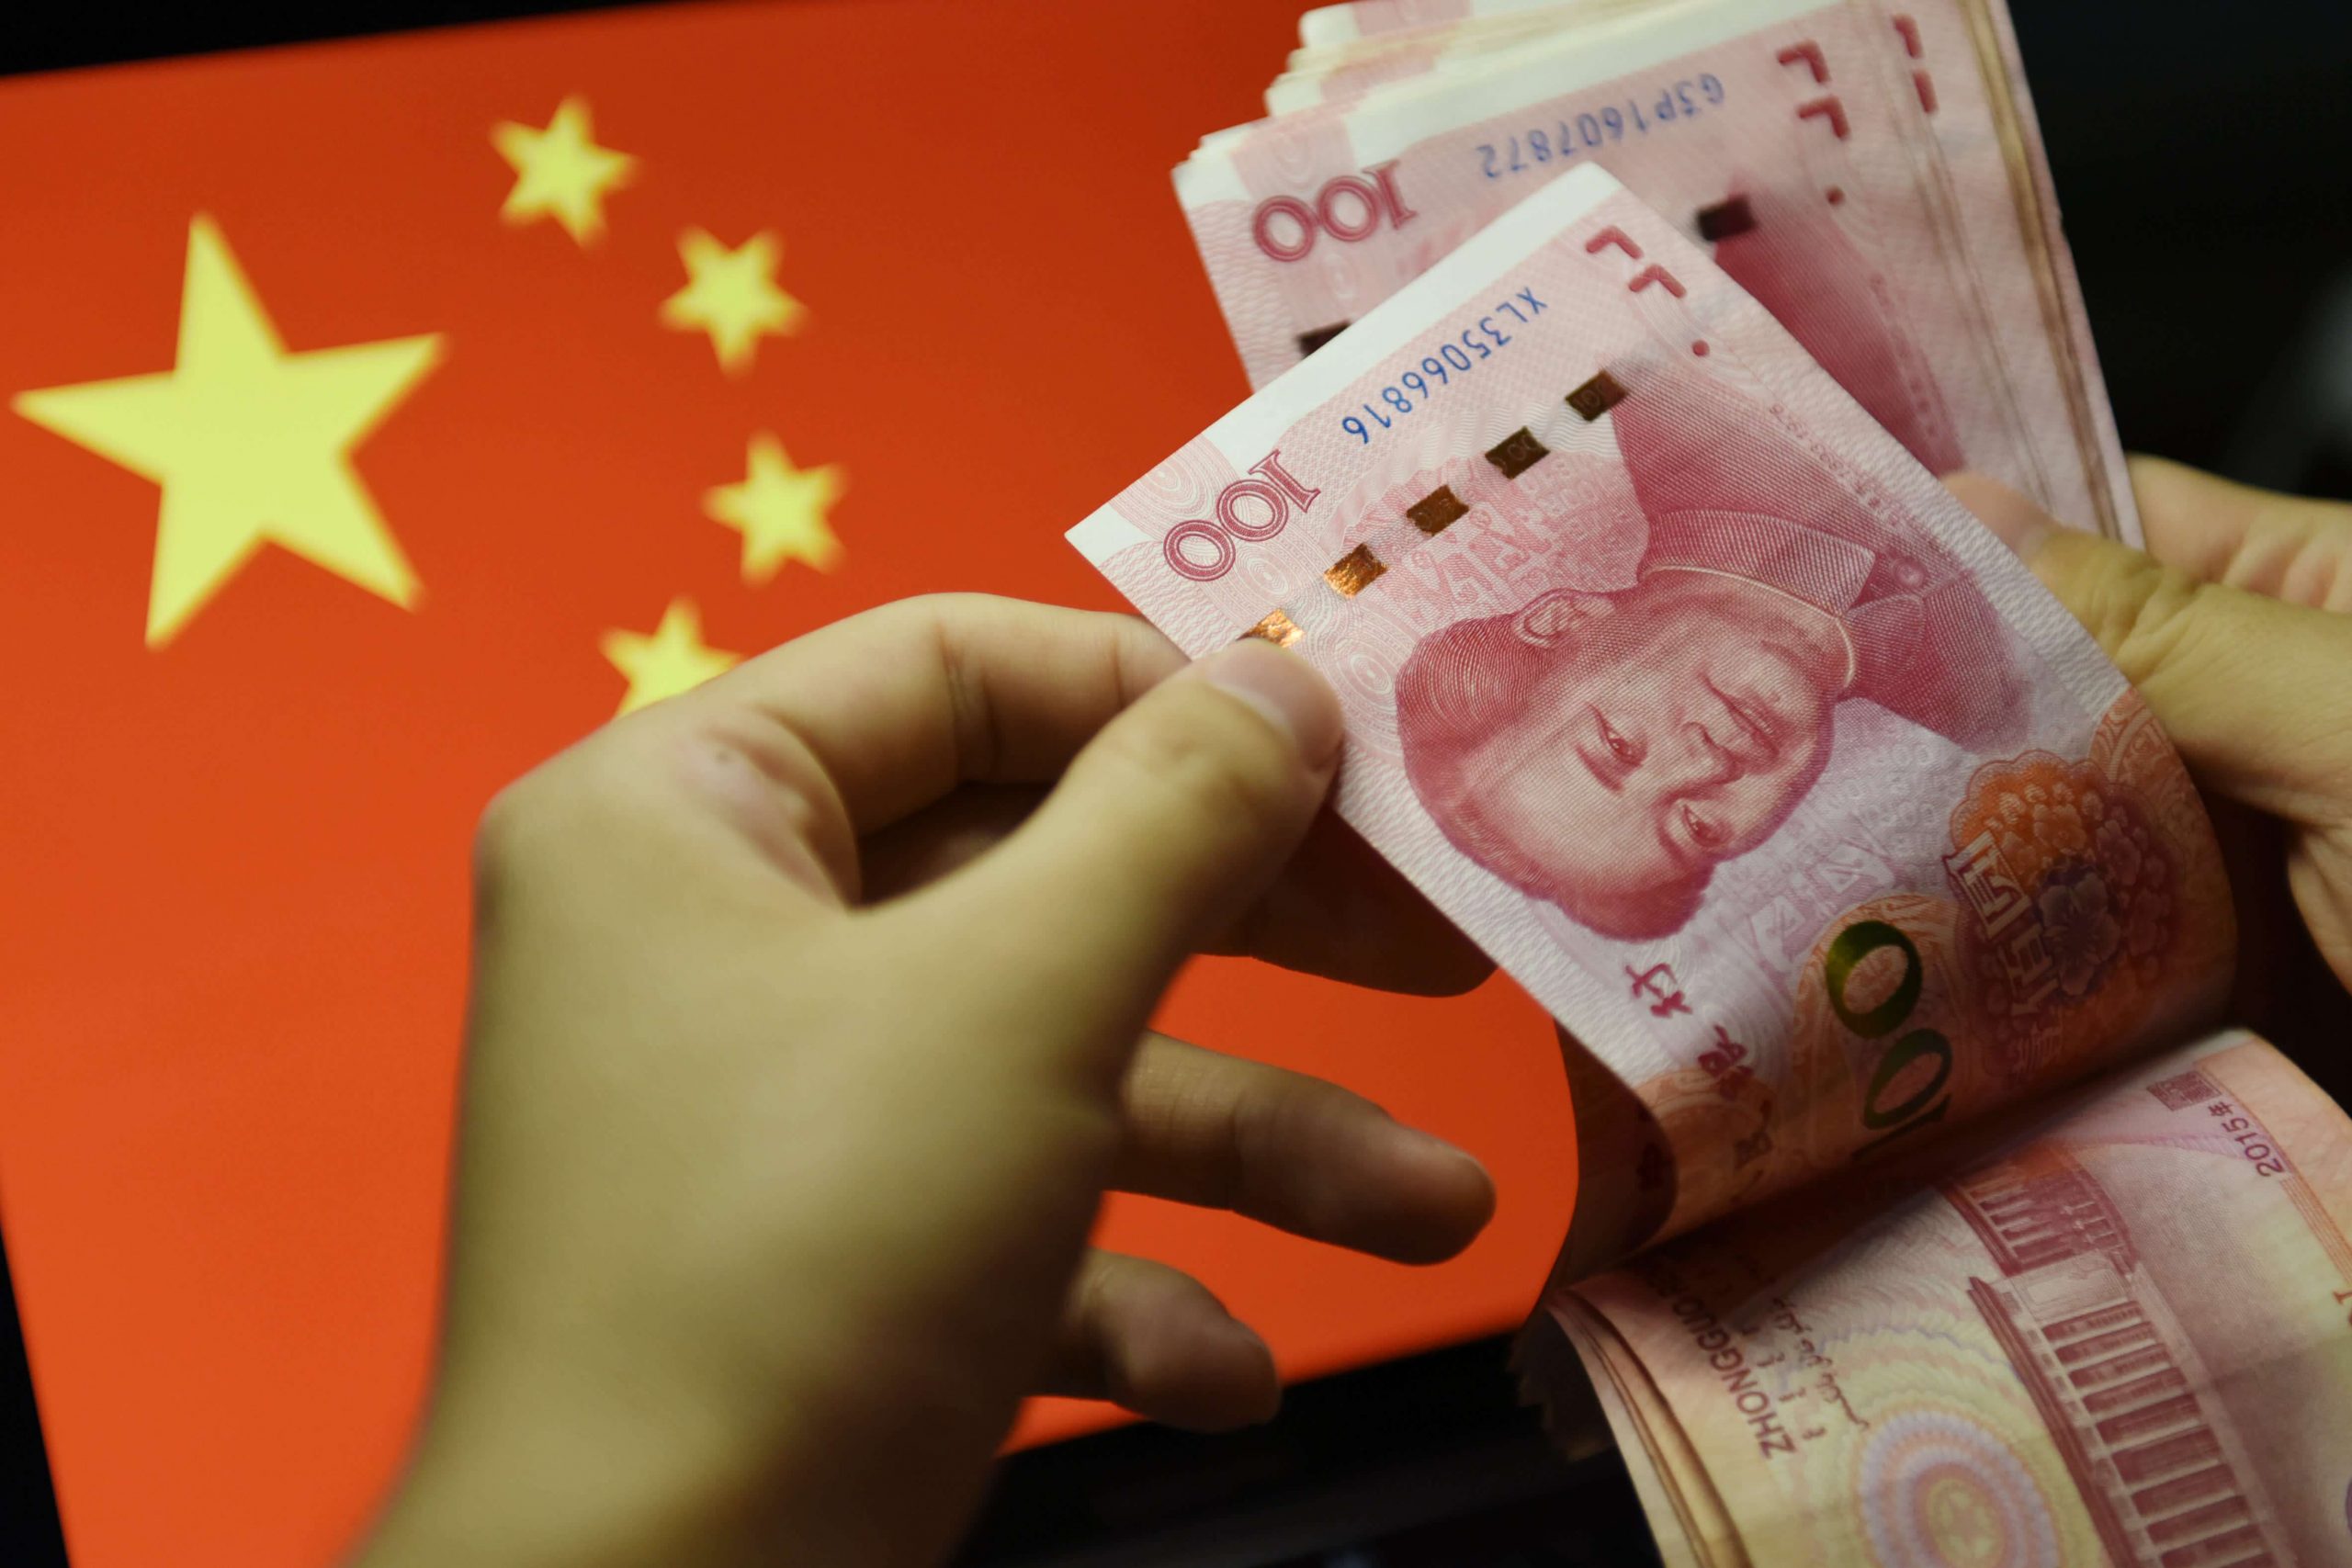 China Gives Out $40 Million Of Digital Yuan In Red Envelopes To Boost Adoption